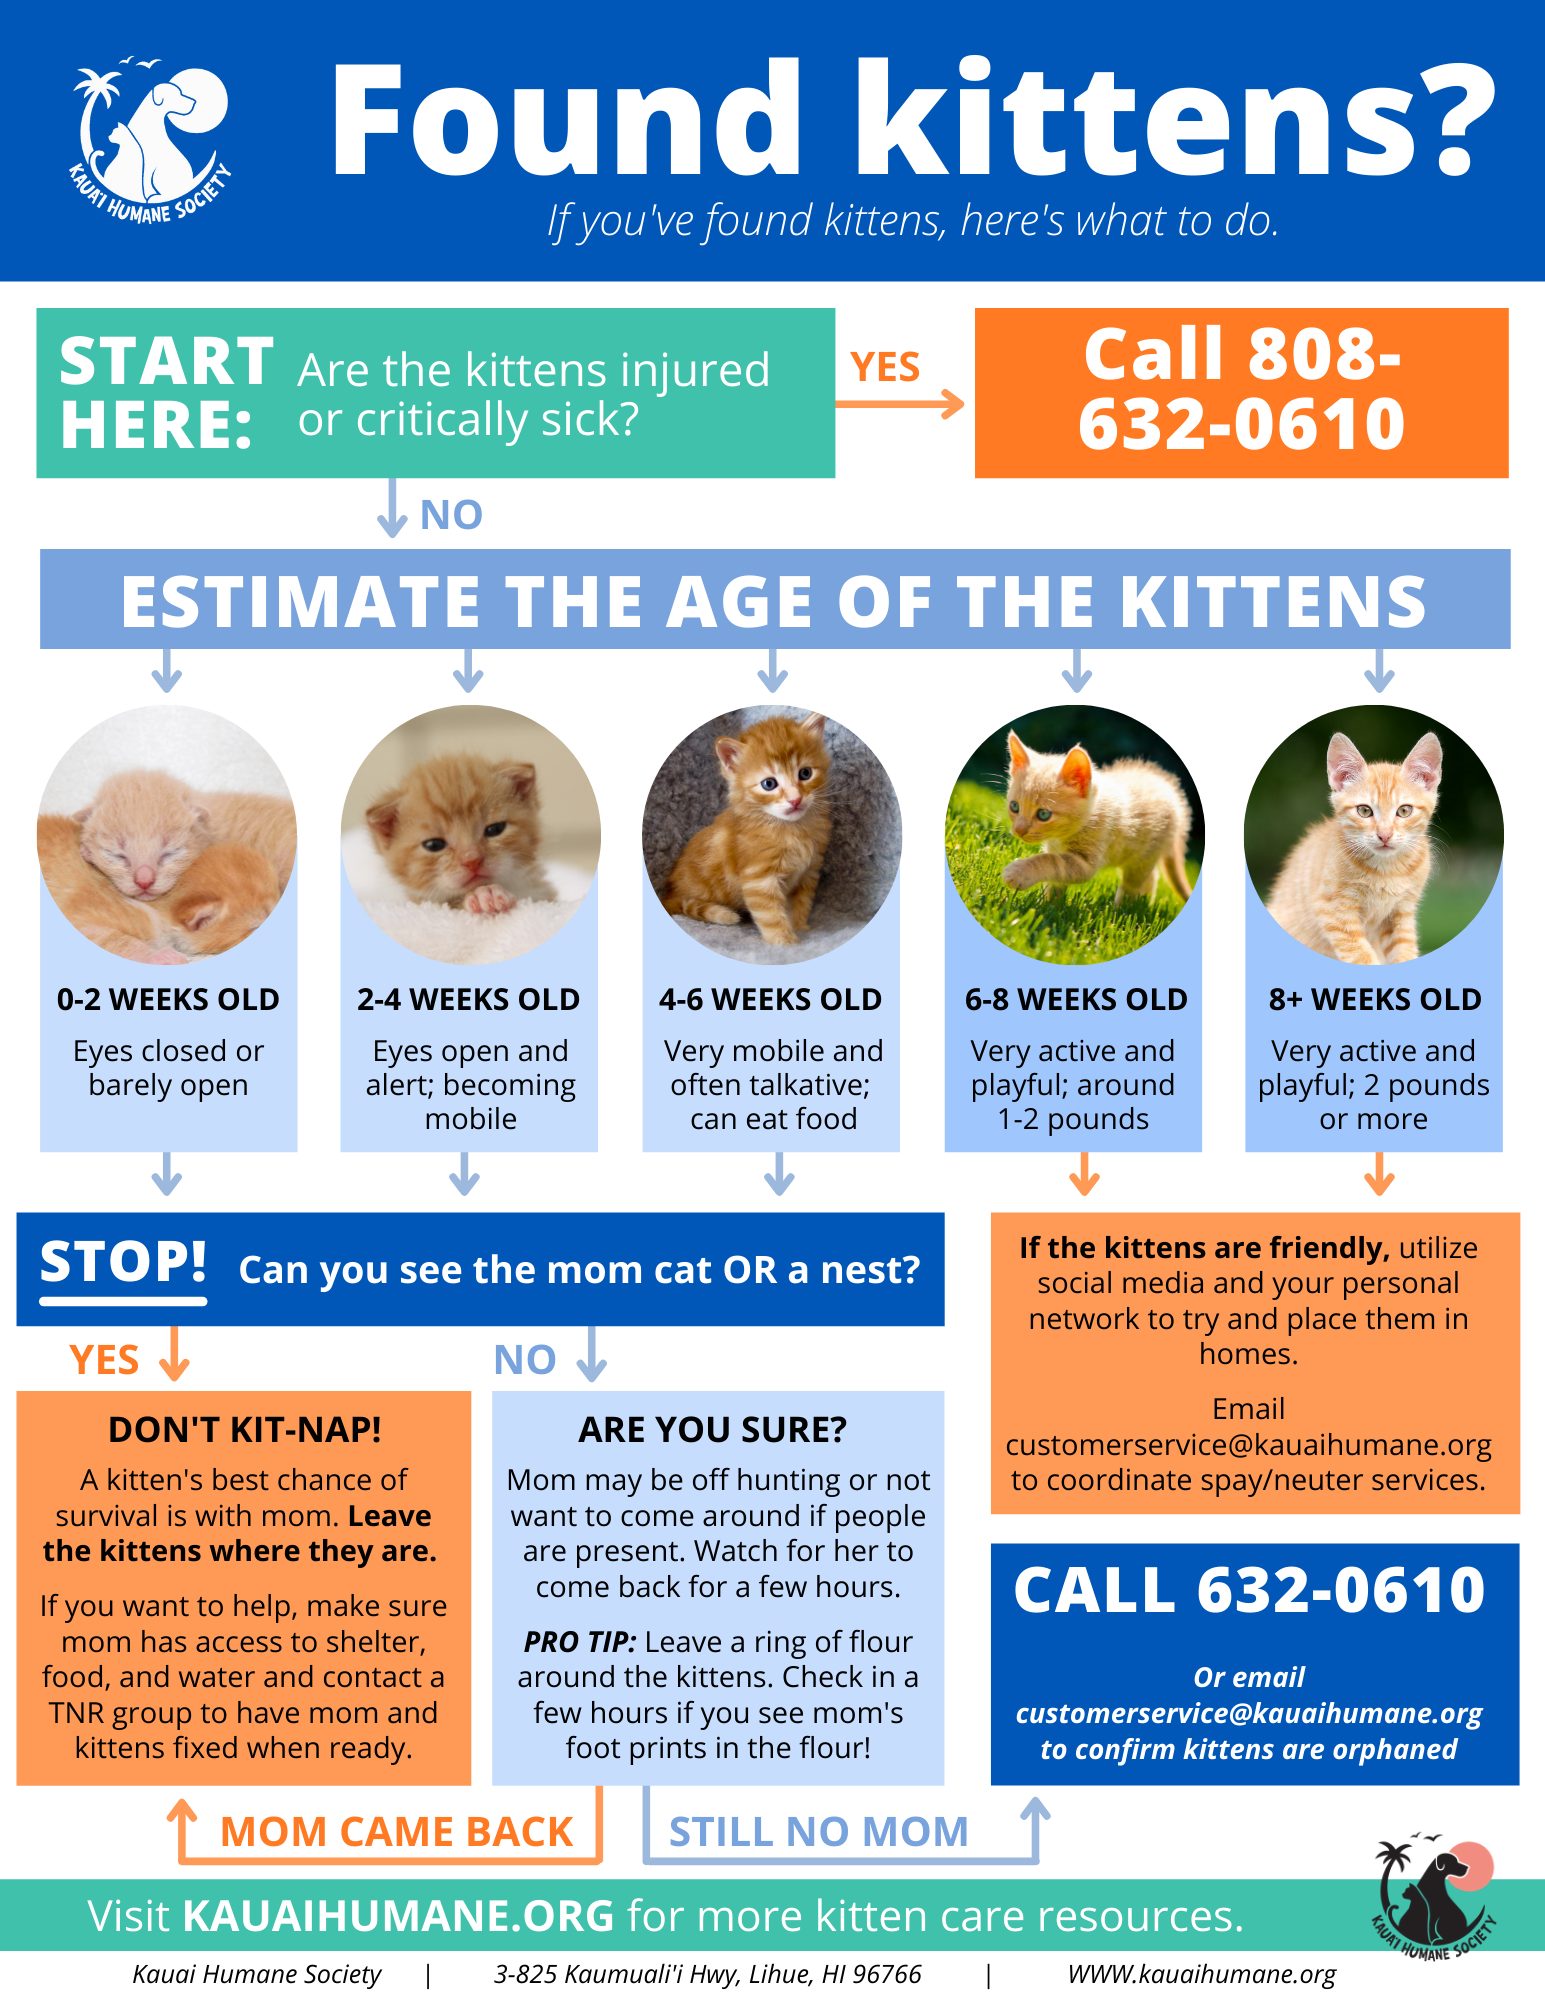 A flow chart for what to do with found kittens.